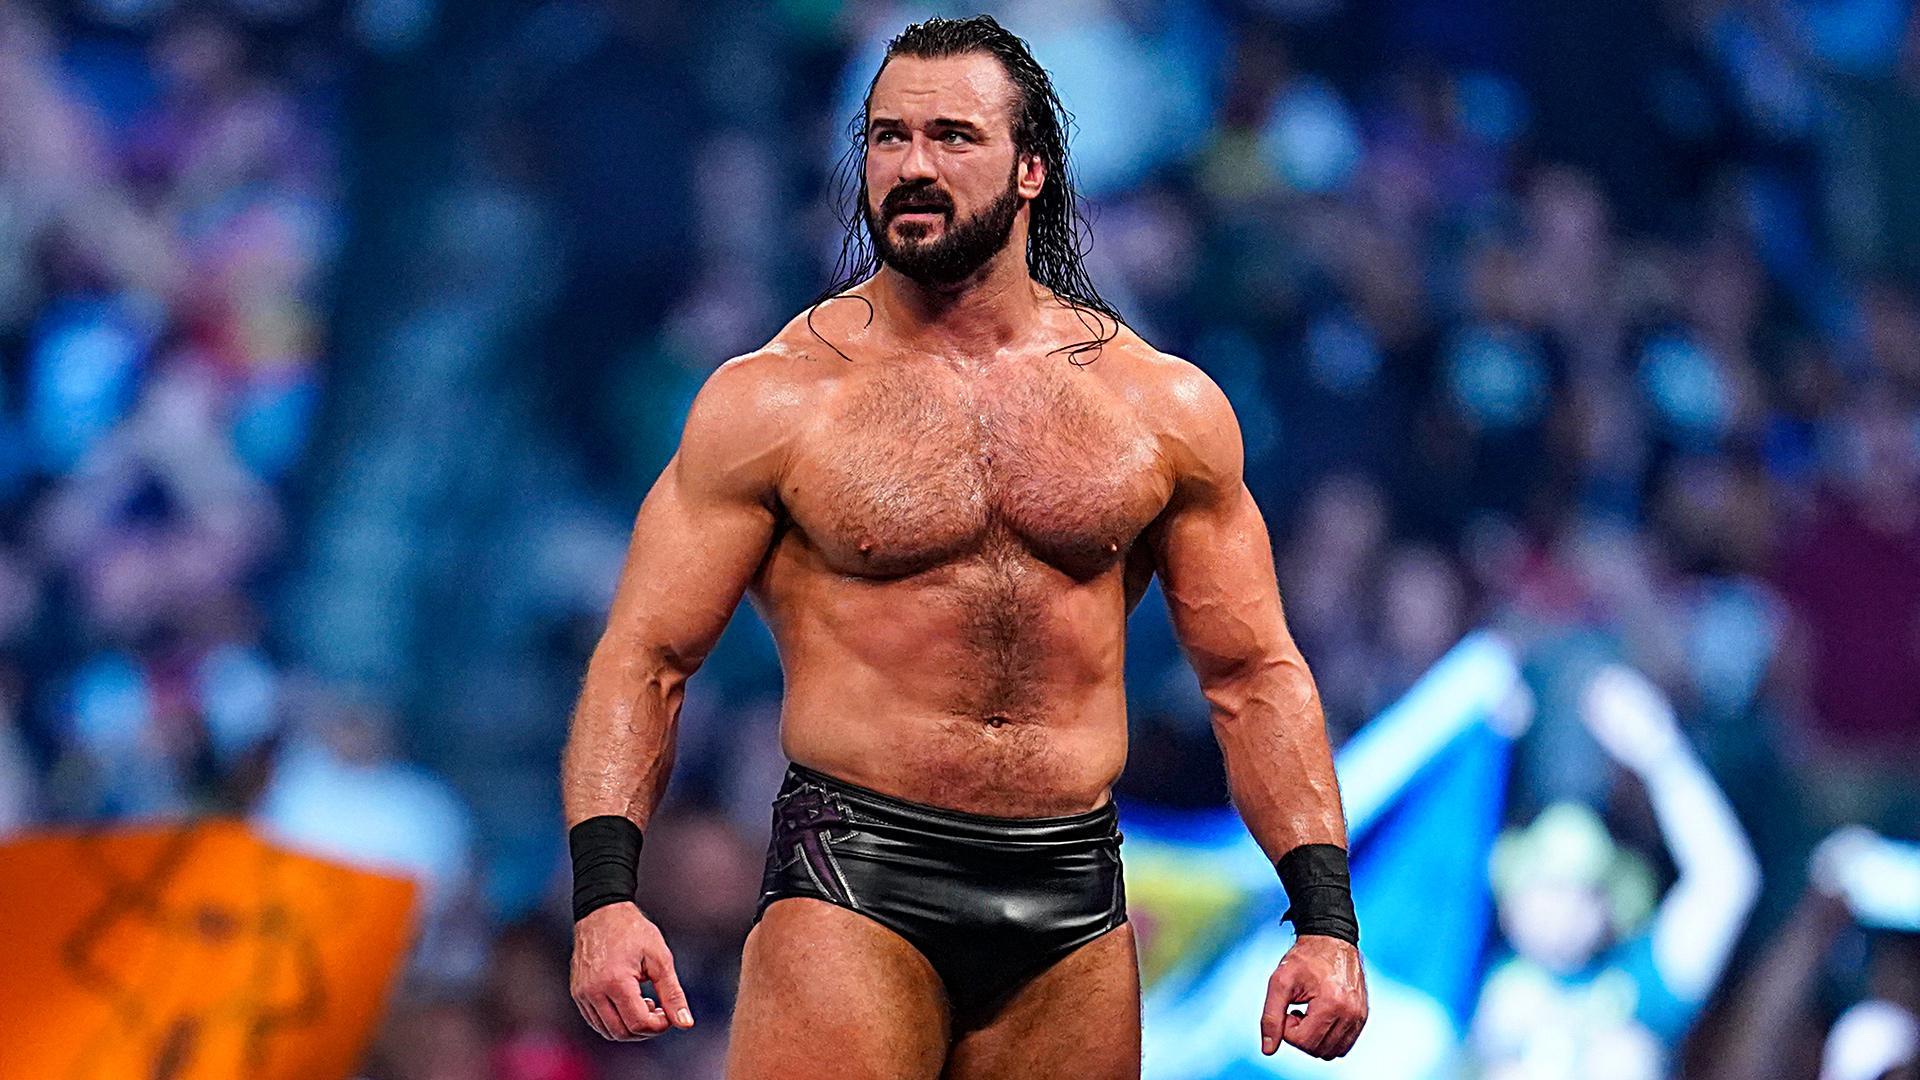 Drew McIntyre admits WrestleMania moment isn't what he envisioned